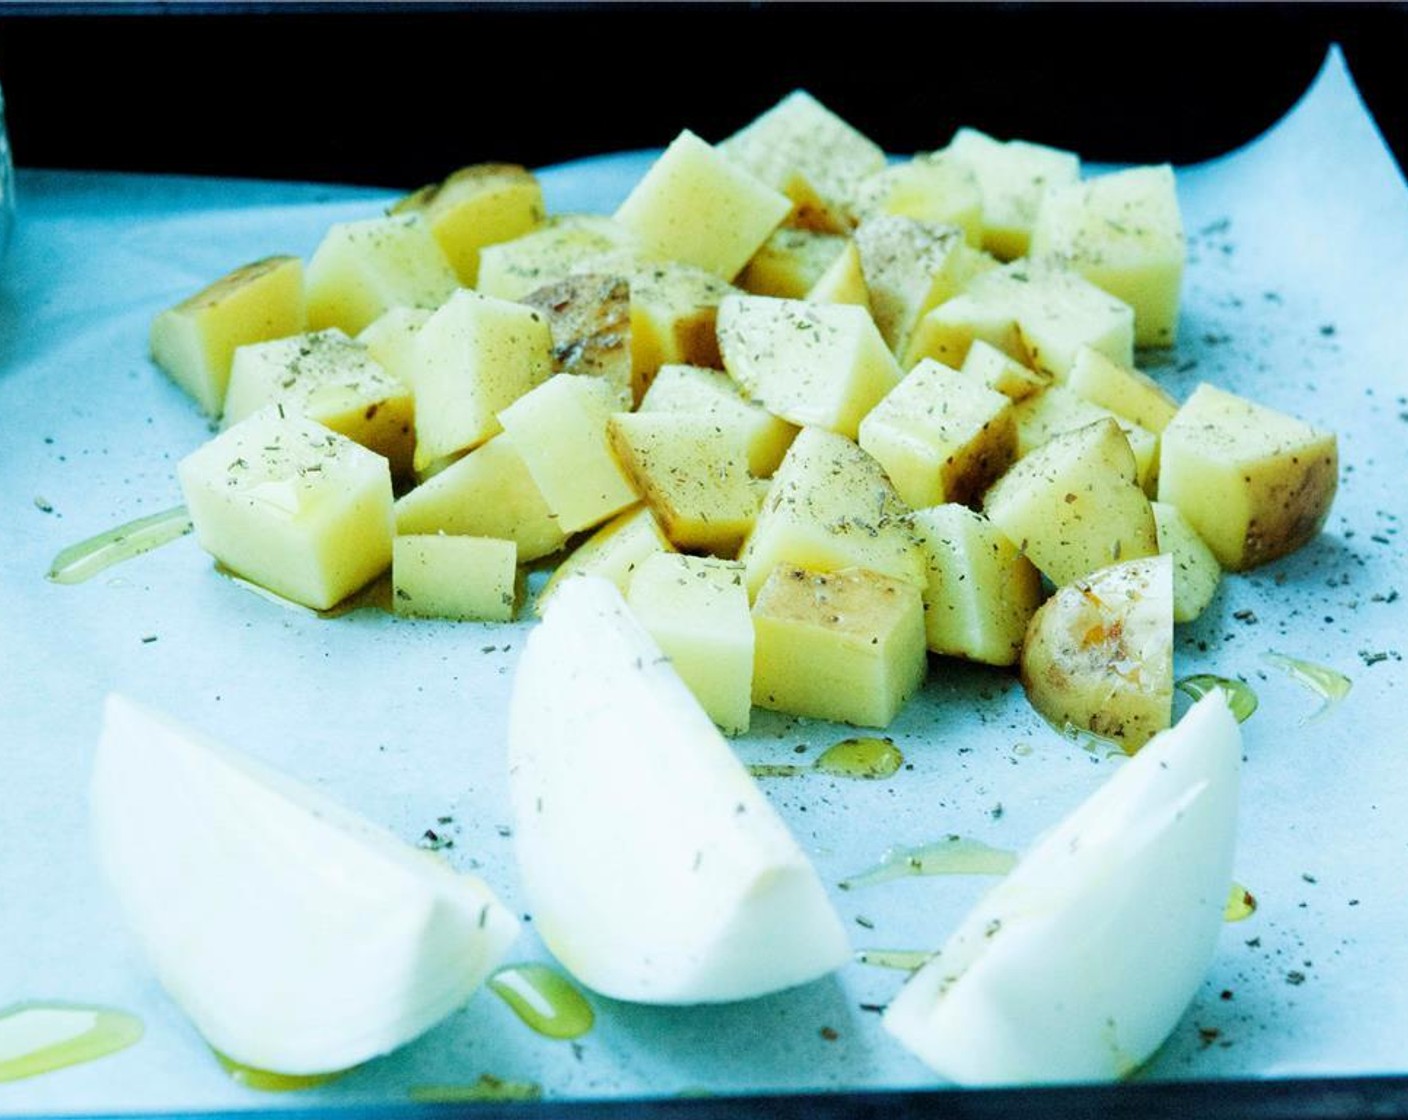 step 10 Slice the Onion (1) into wedges and dice the Potatoes (2). Dress them with Salt (to taste), Ground Black Pepper (to taste), and a drizzle of Extra-Virgin Olive Oil (1/4 cup).